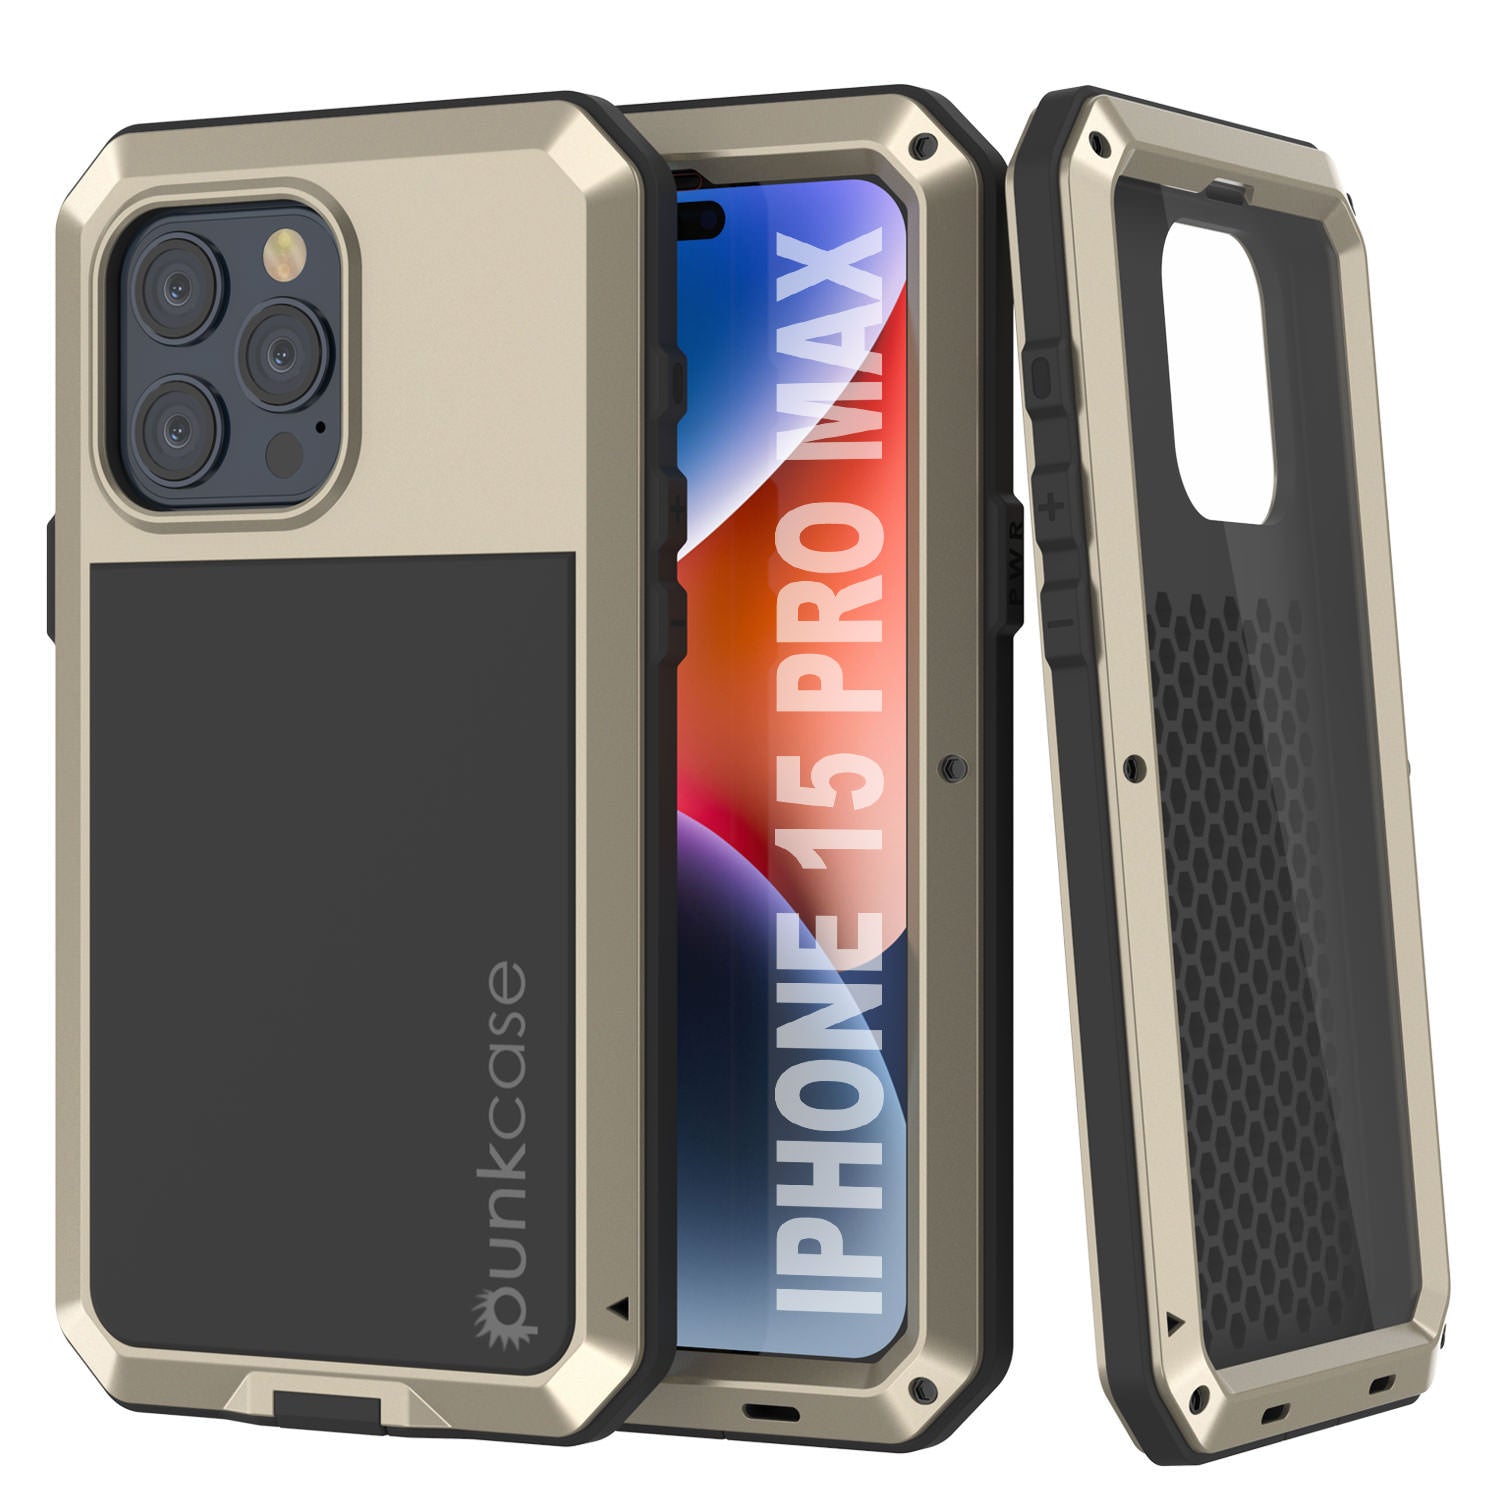 Compatible with iPhone 15 Pro Max Metal Case, Heavy Duty Rugged